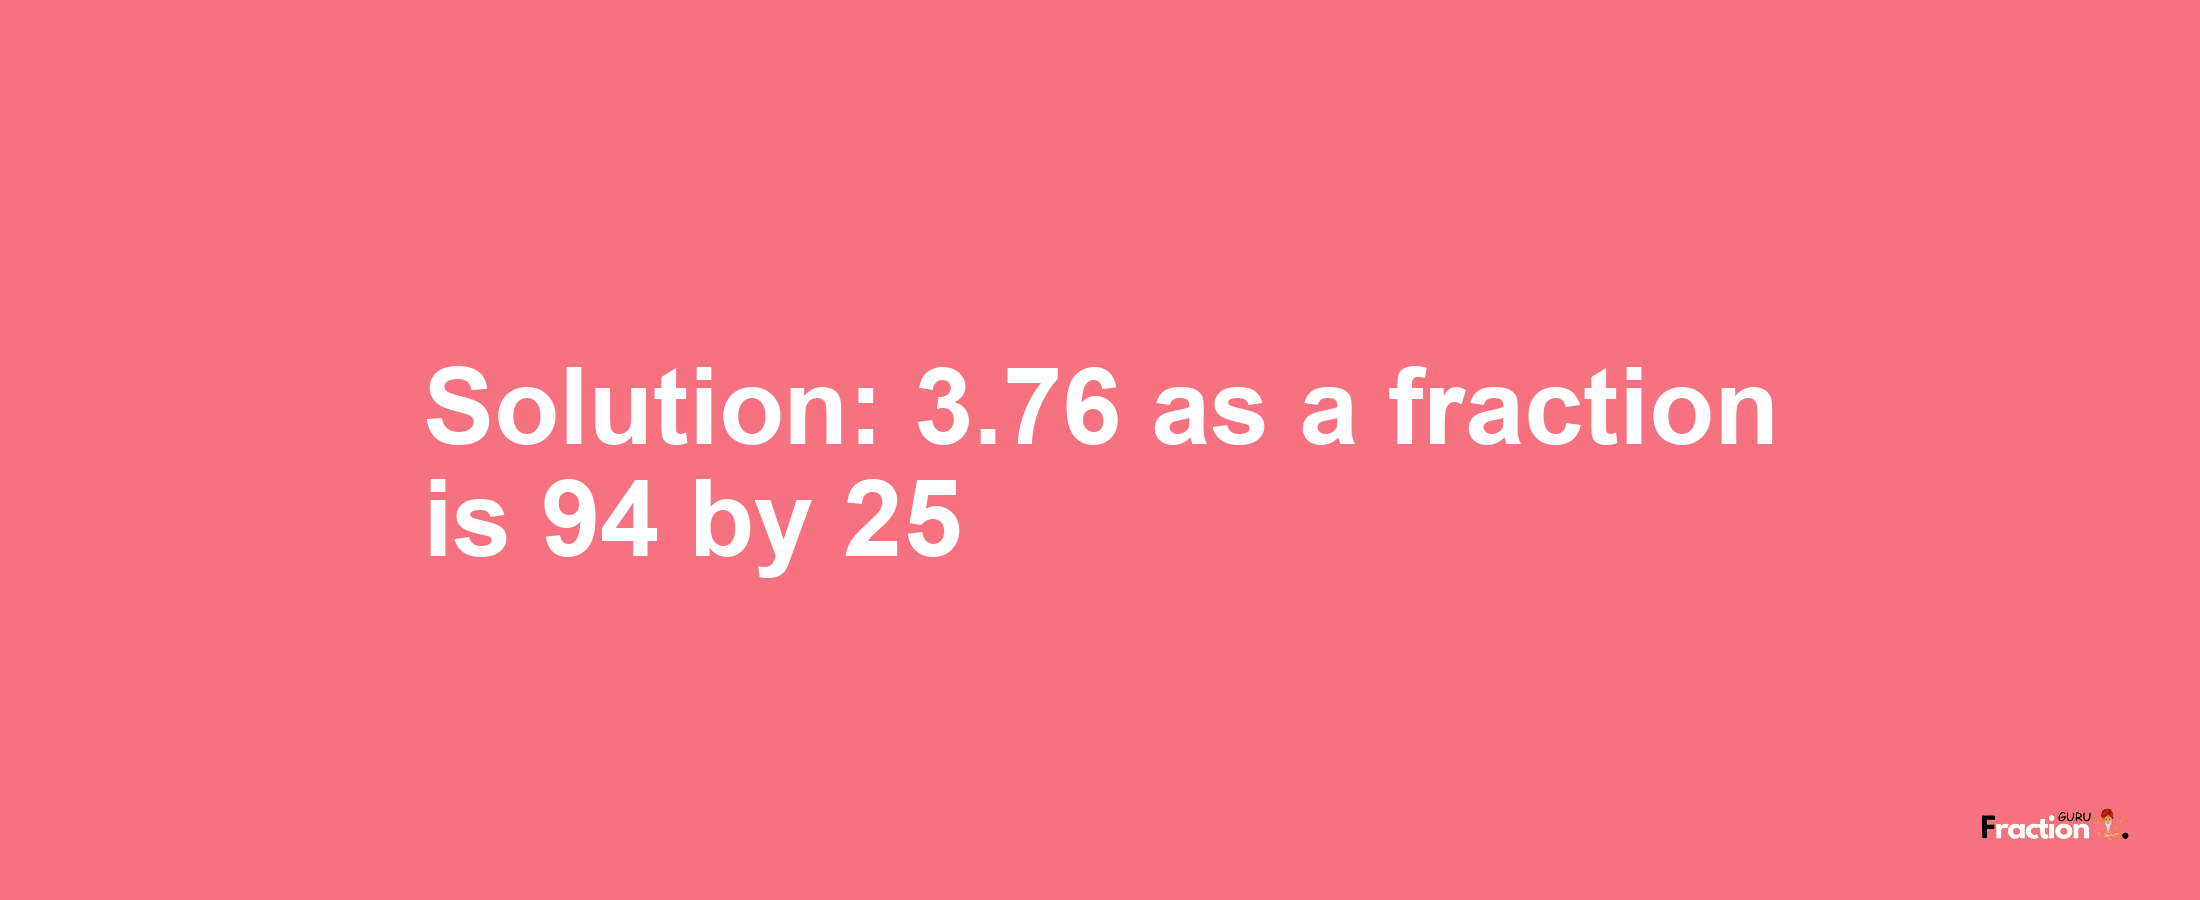 Solution:3.76 as a fraction is 94/25